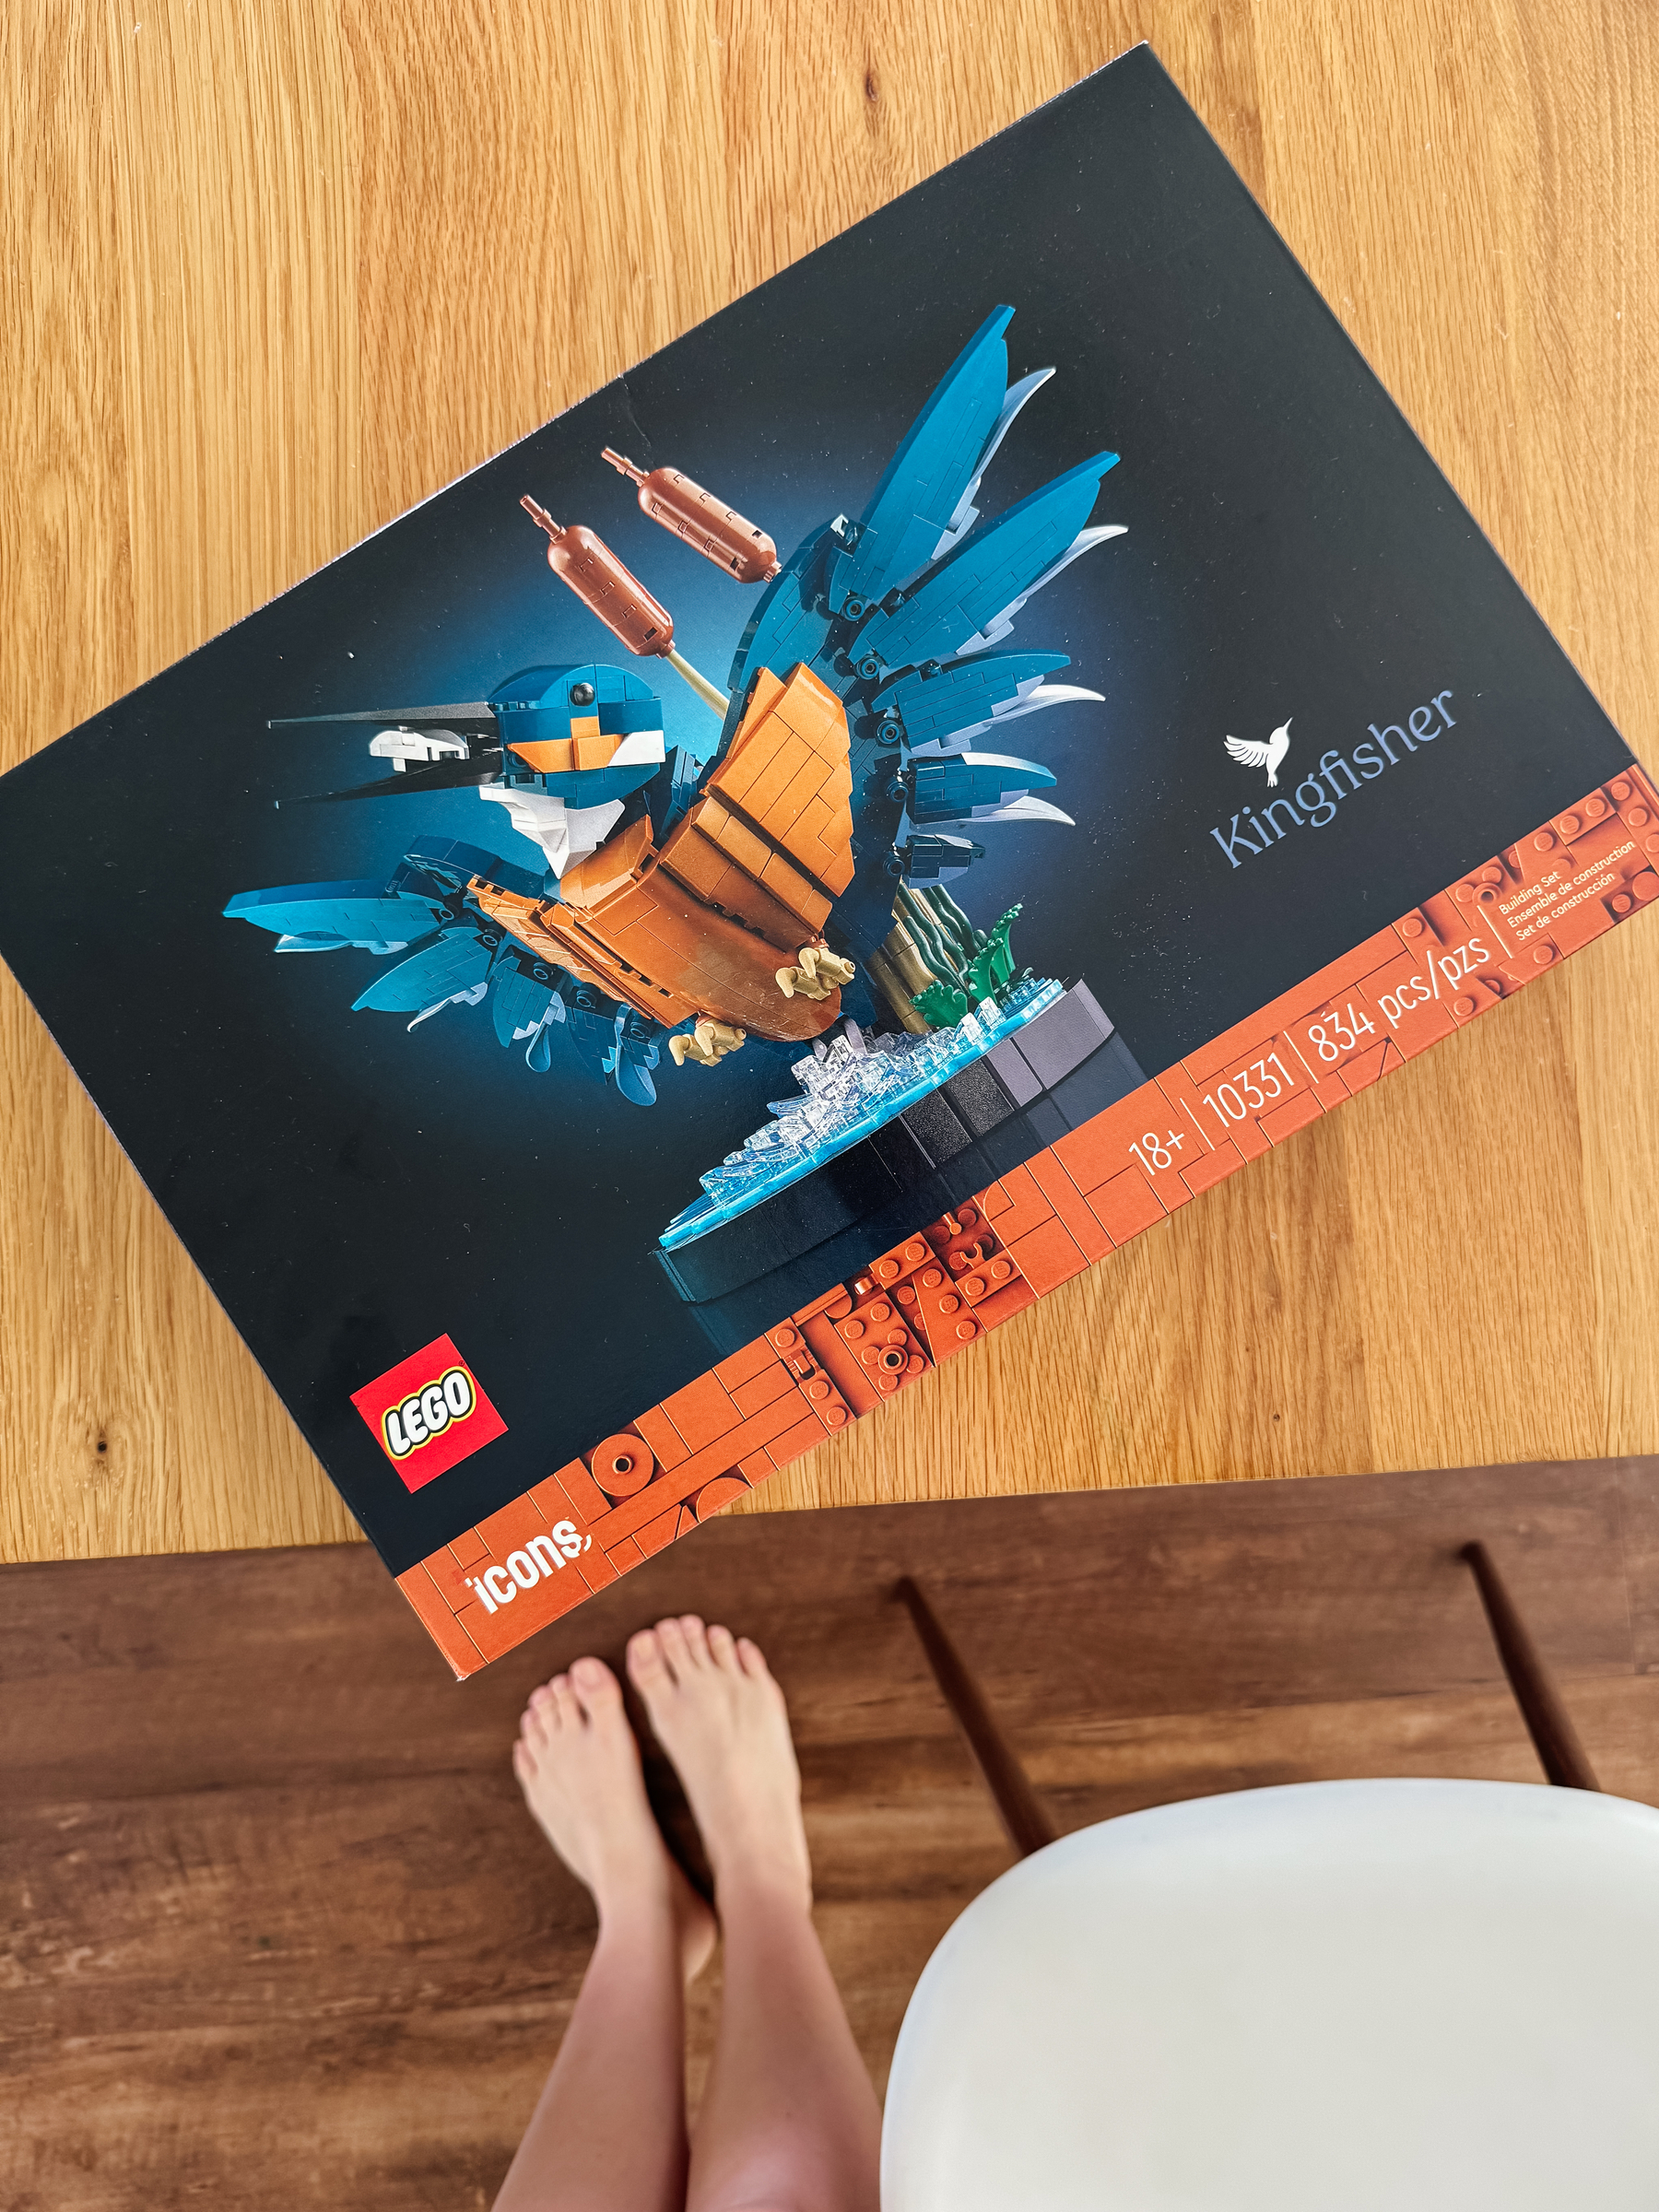 Kingfisher LEGO box sitting on a table ready to be put together